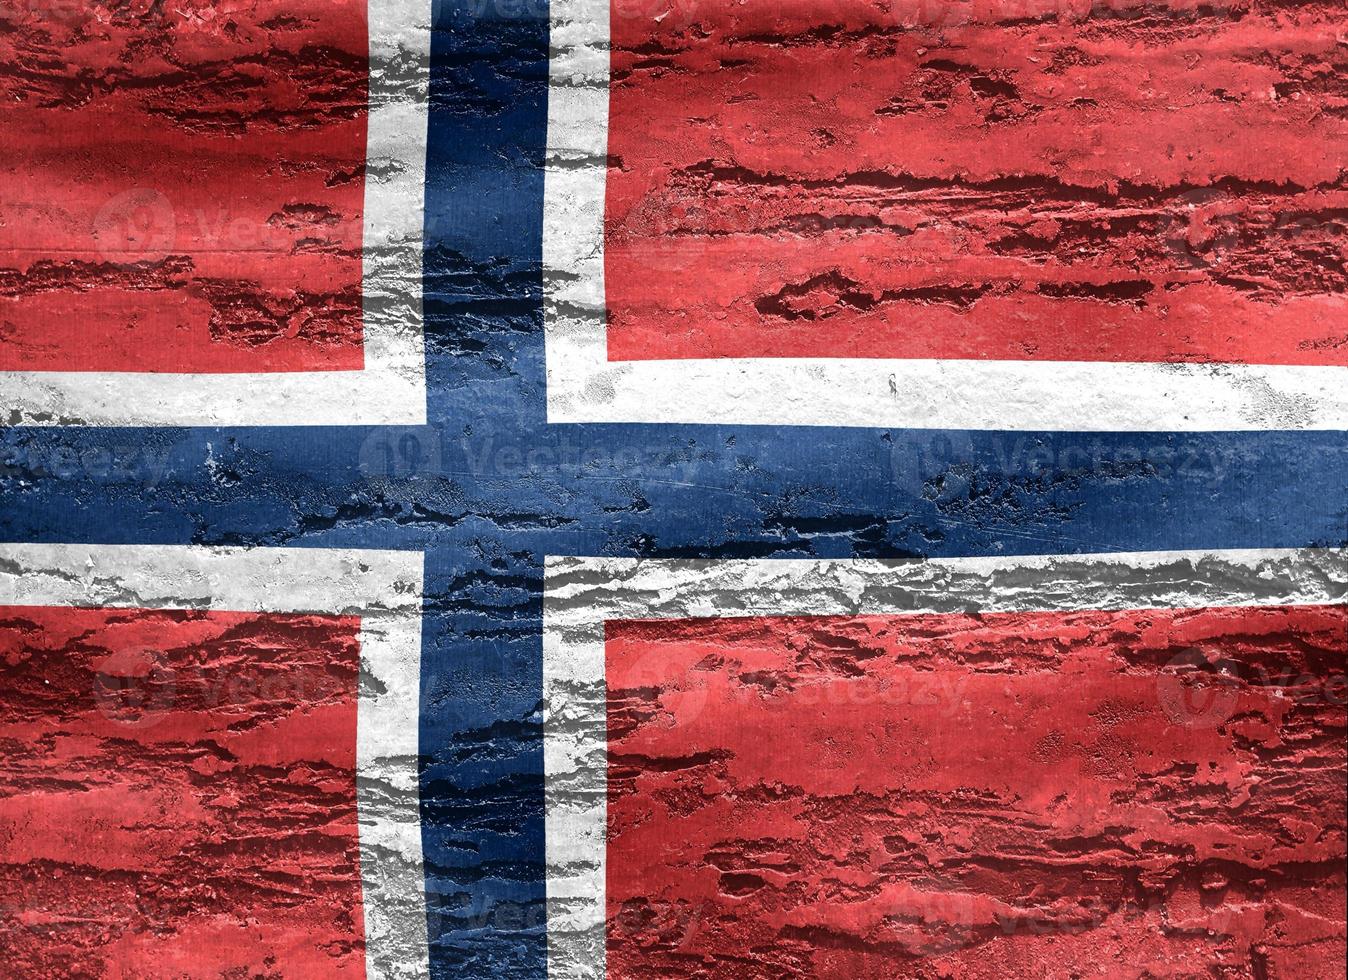 3D-Illustration of a Norway flag - realistic waving fabric flag photo